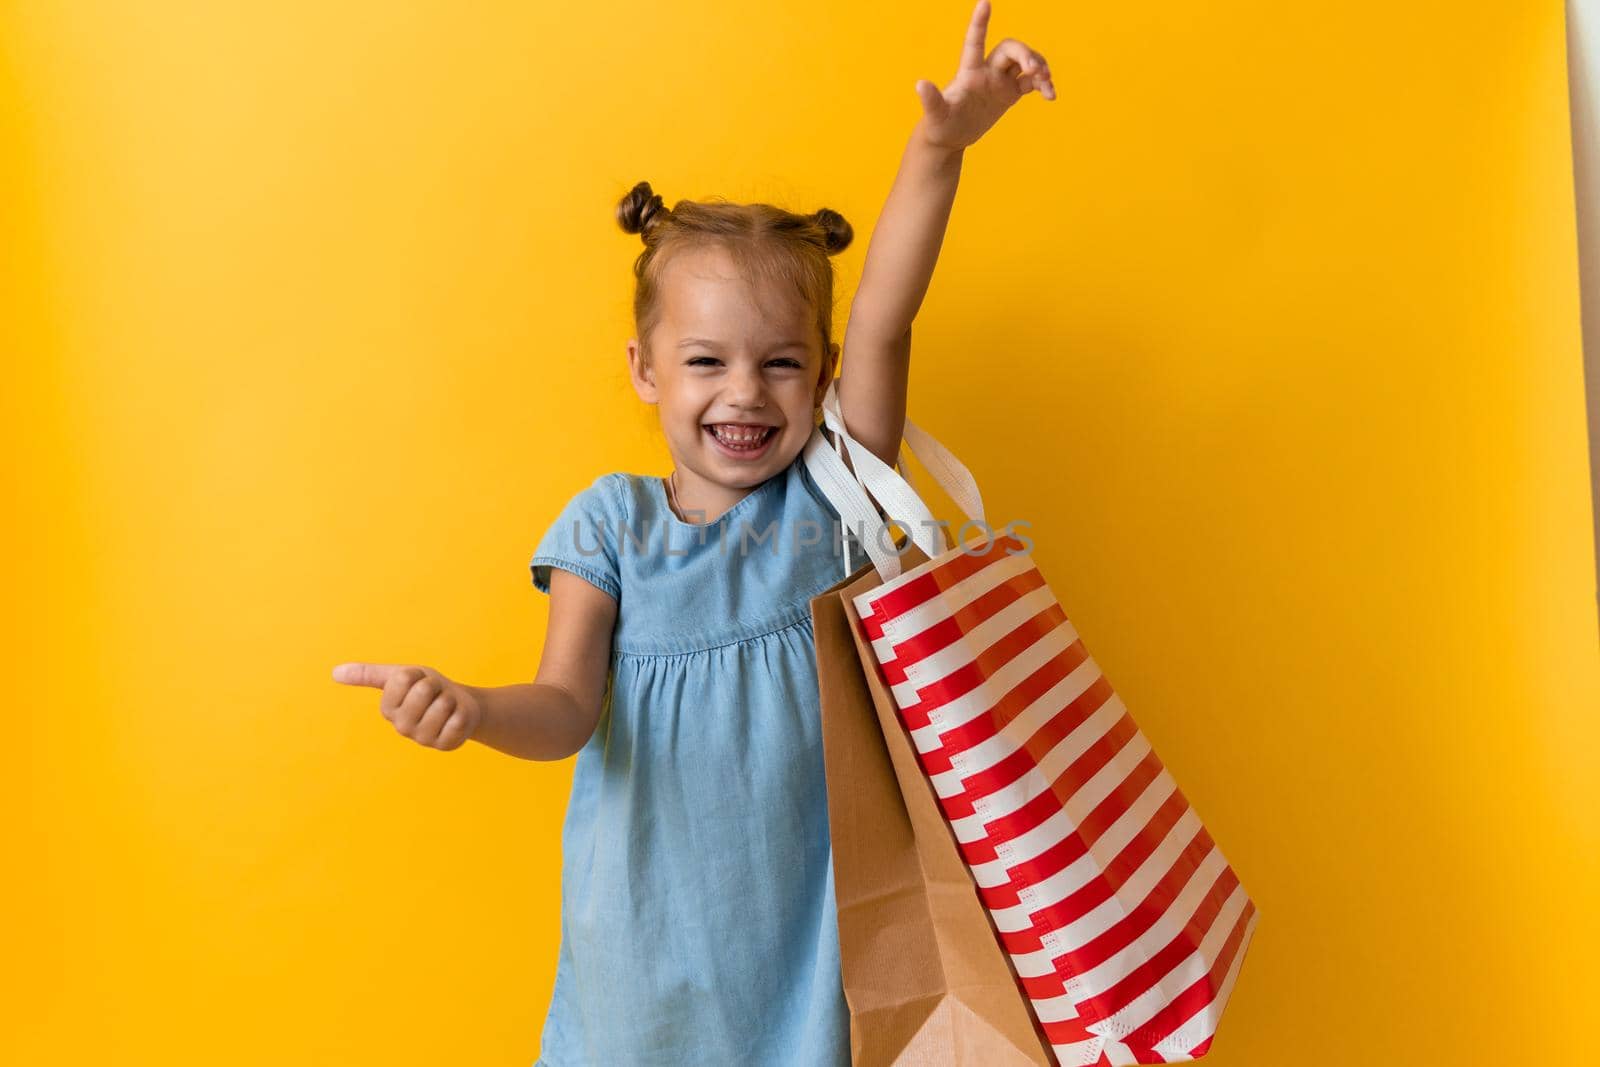 Portrait Beautiful Happy Little Preschool Girl Smiling Cheerful Holding Cardboard Bags Points Finger To Side And Up On Orange Yellow Background. Happiness, Consumerism, Sale People Shopping Concept.